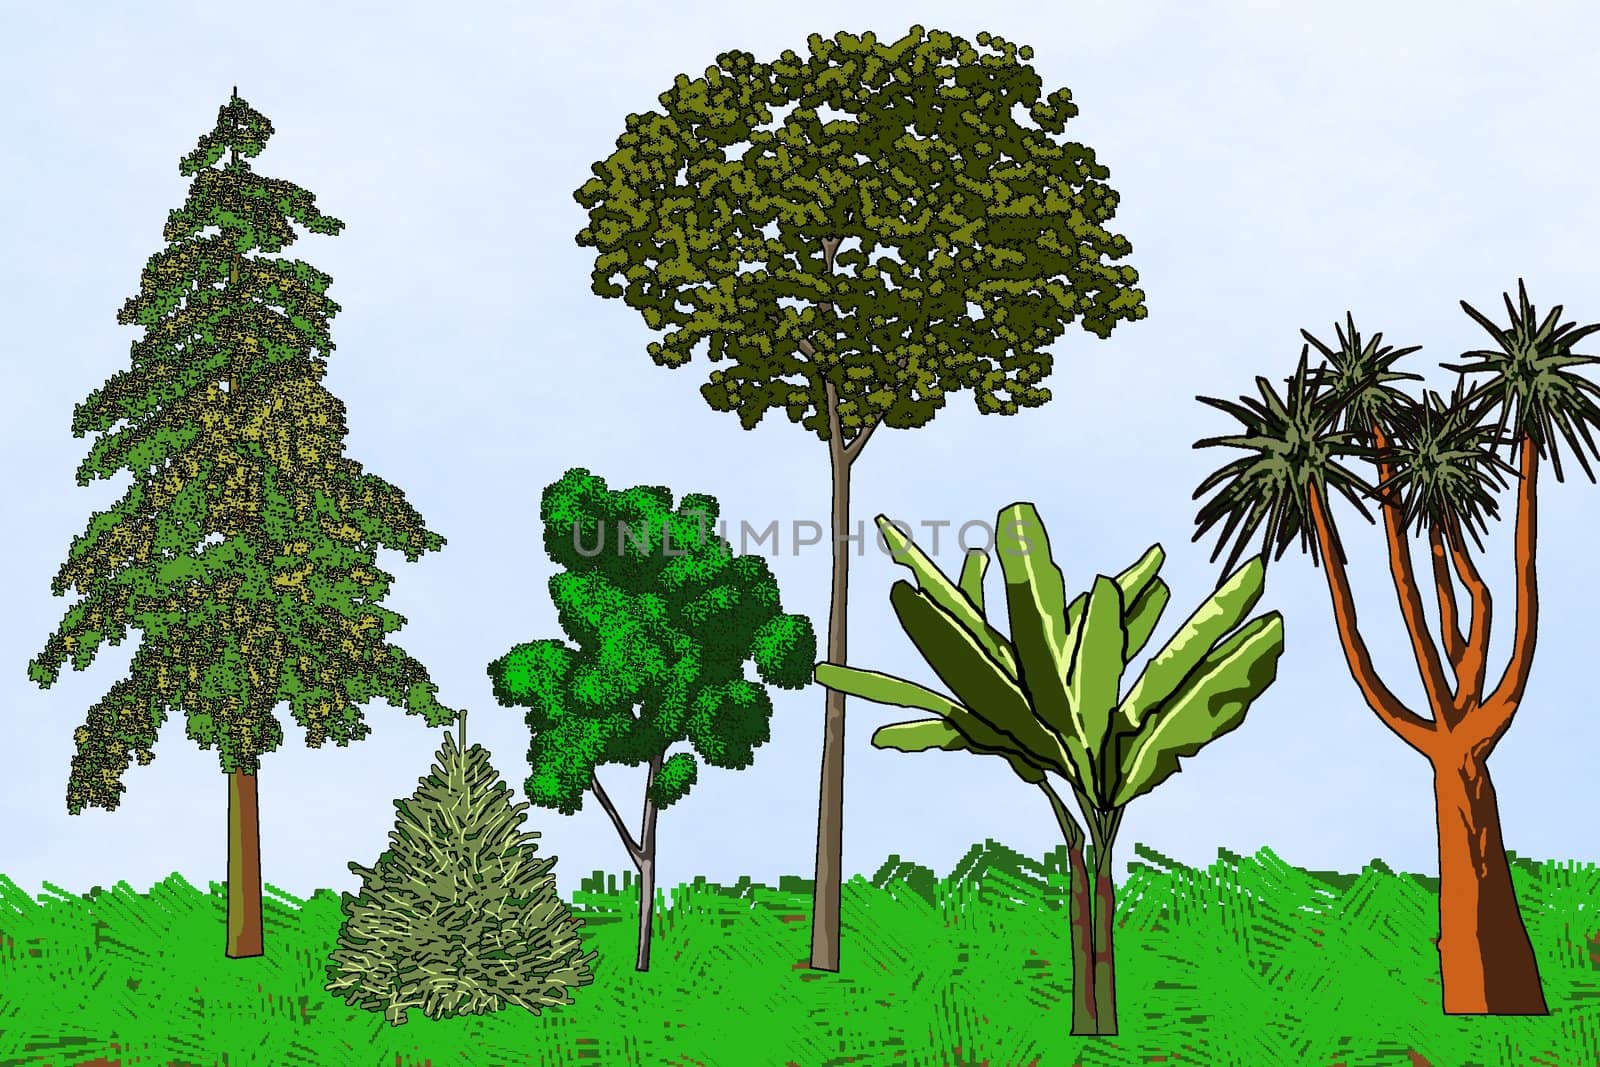 Six artistic trees from different parts of the world - a raster illustration.